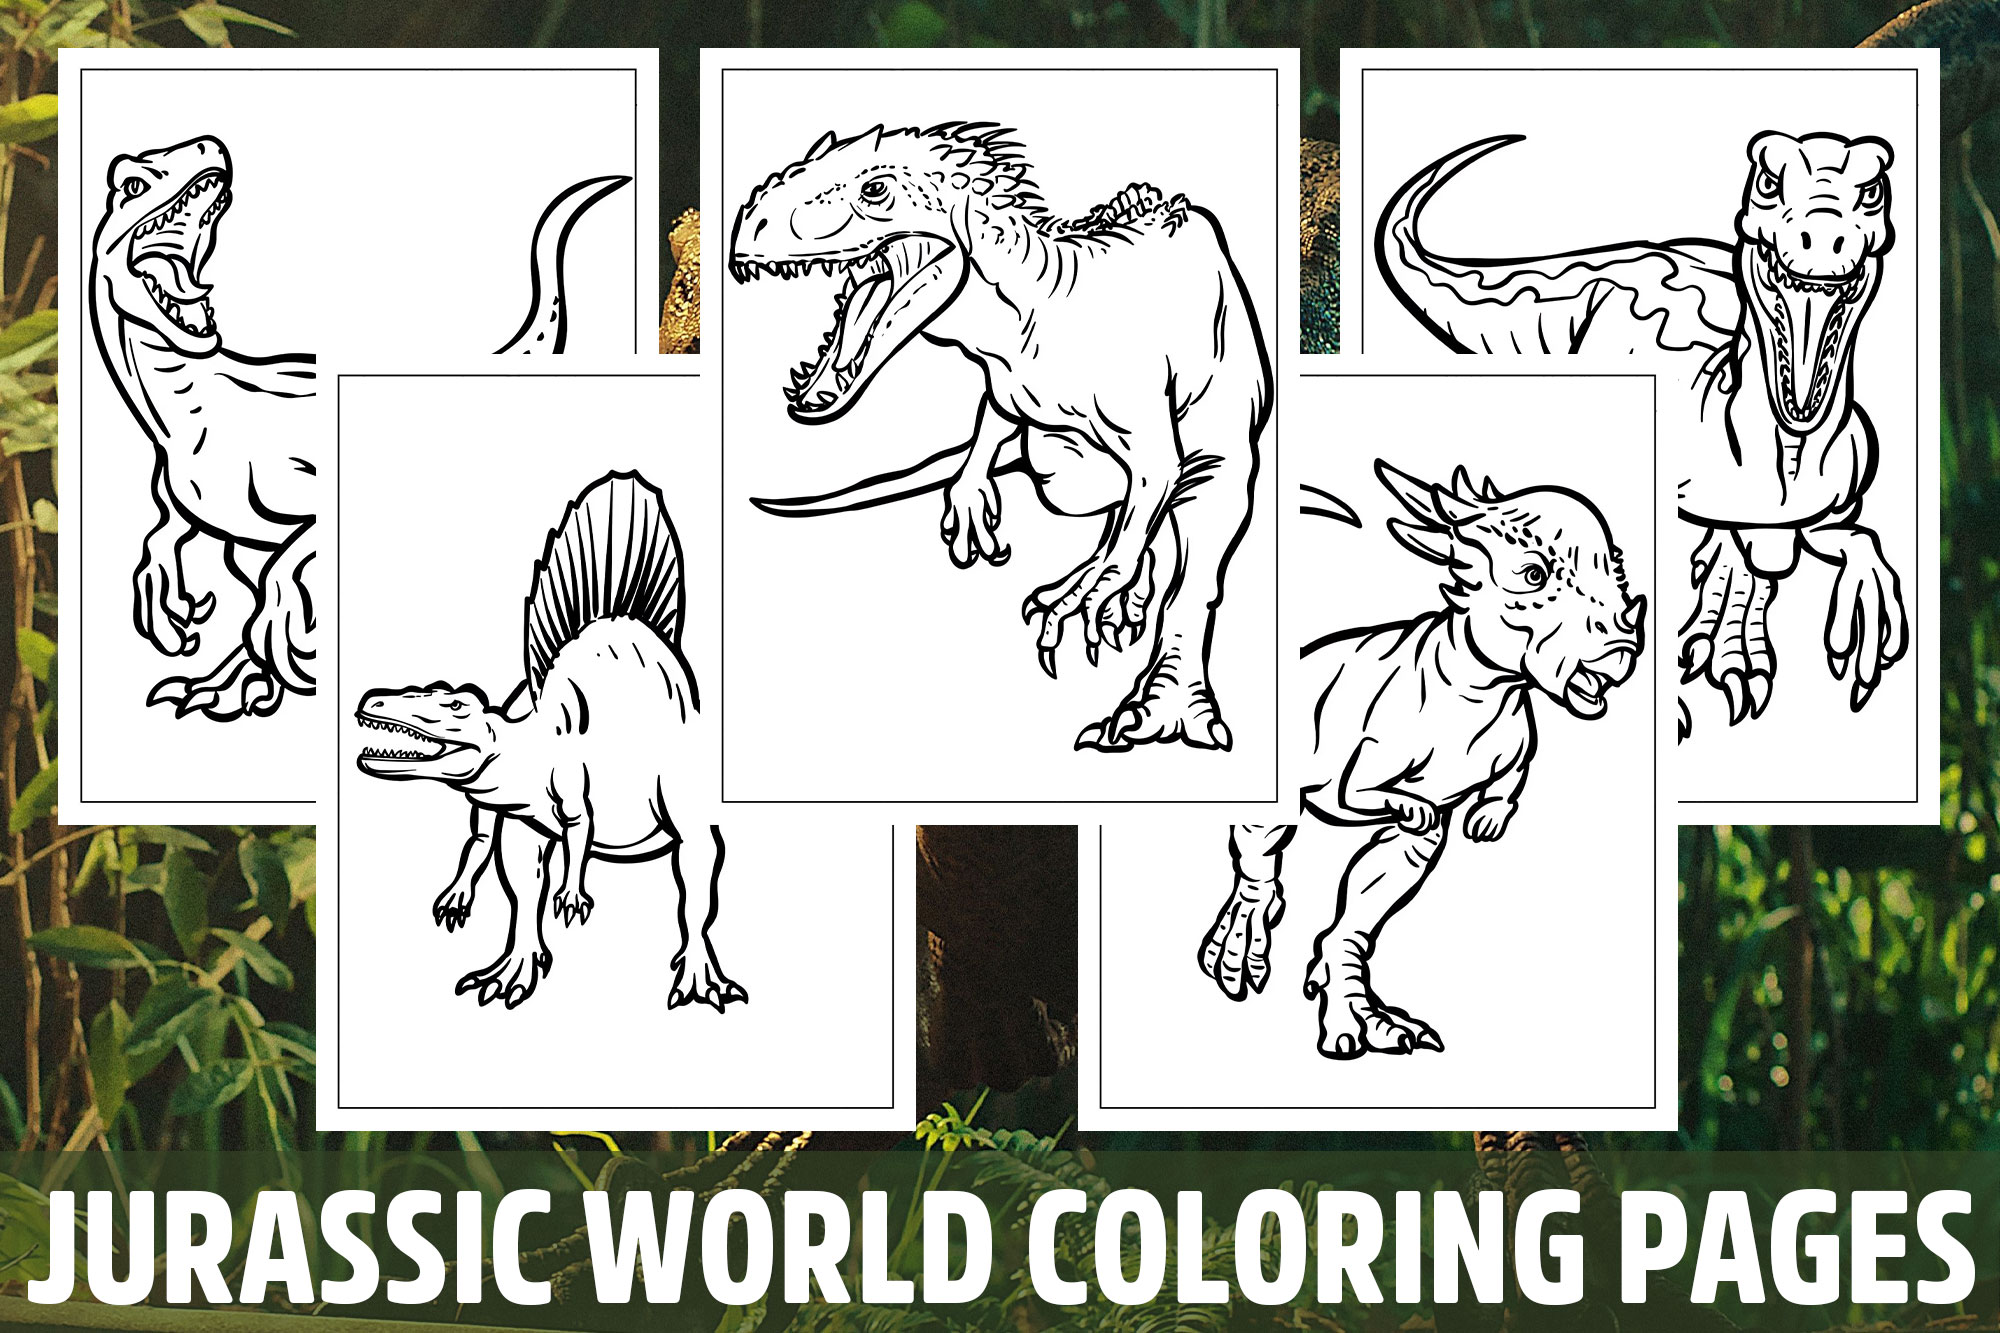 Jurassic world coloring pages for kids girls boys teens birthday school activity made by teachers